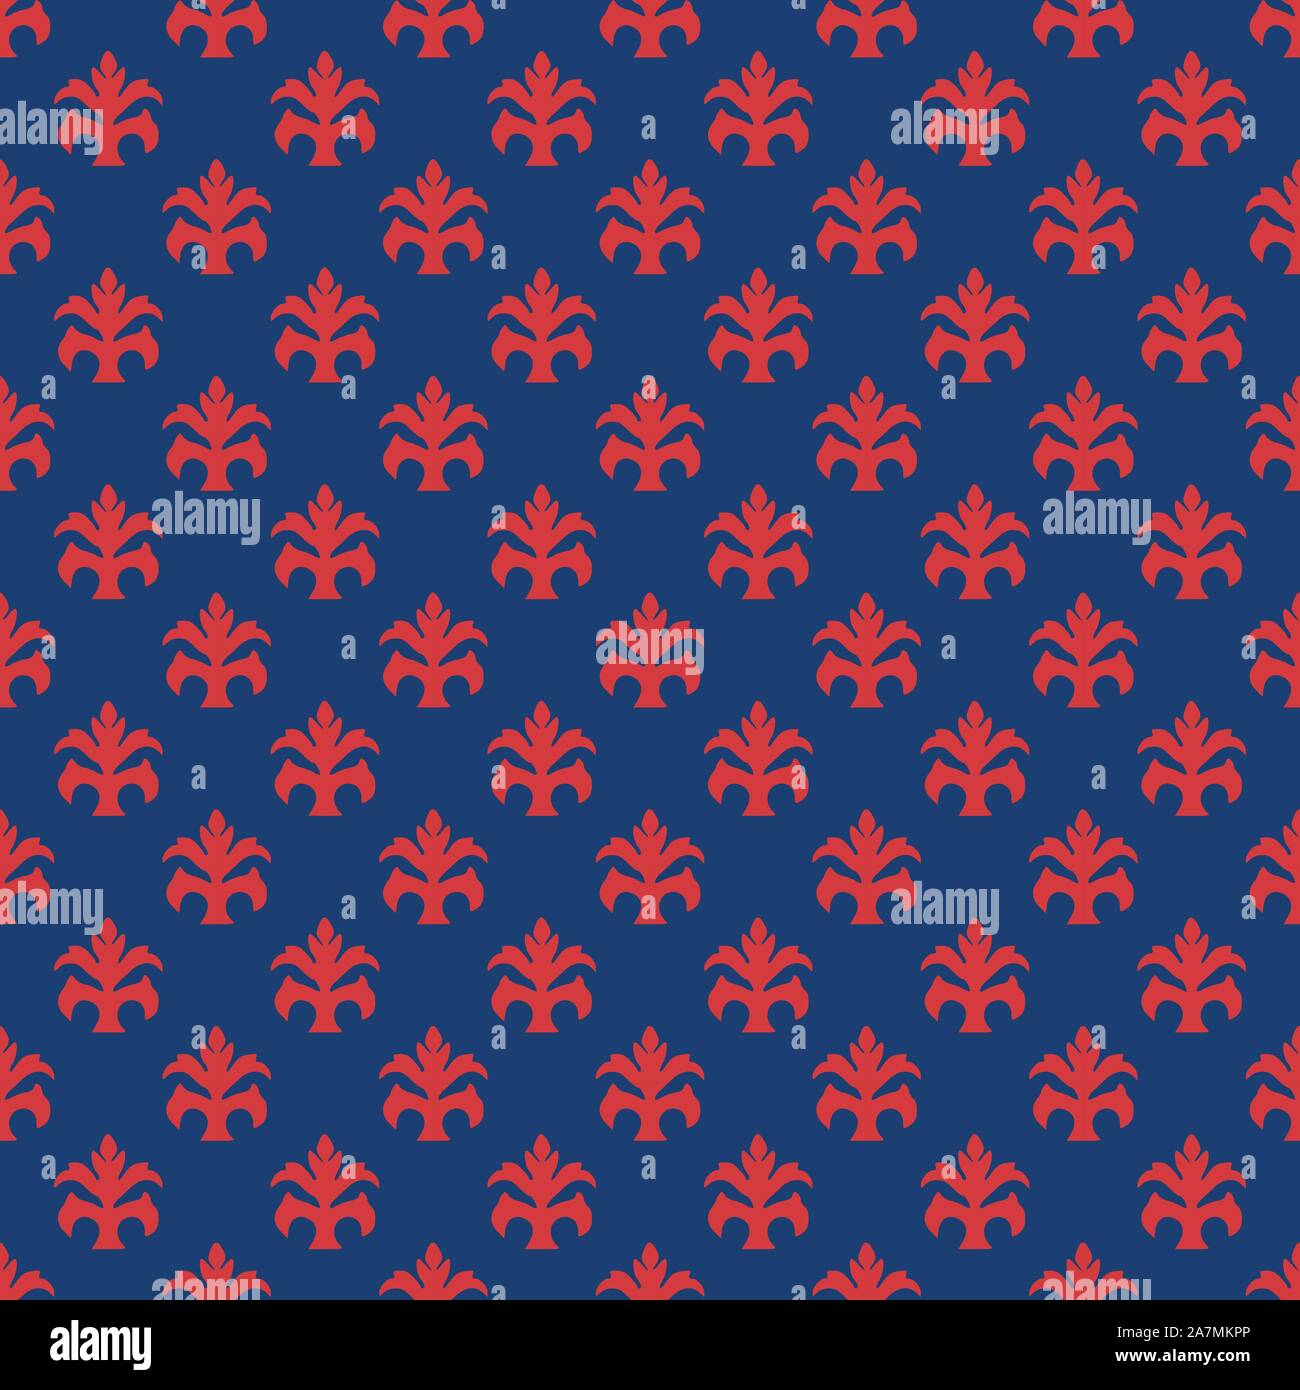 Red floral design decorative seamless pattern vector blue background. Stock Vector